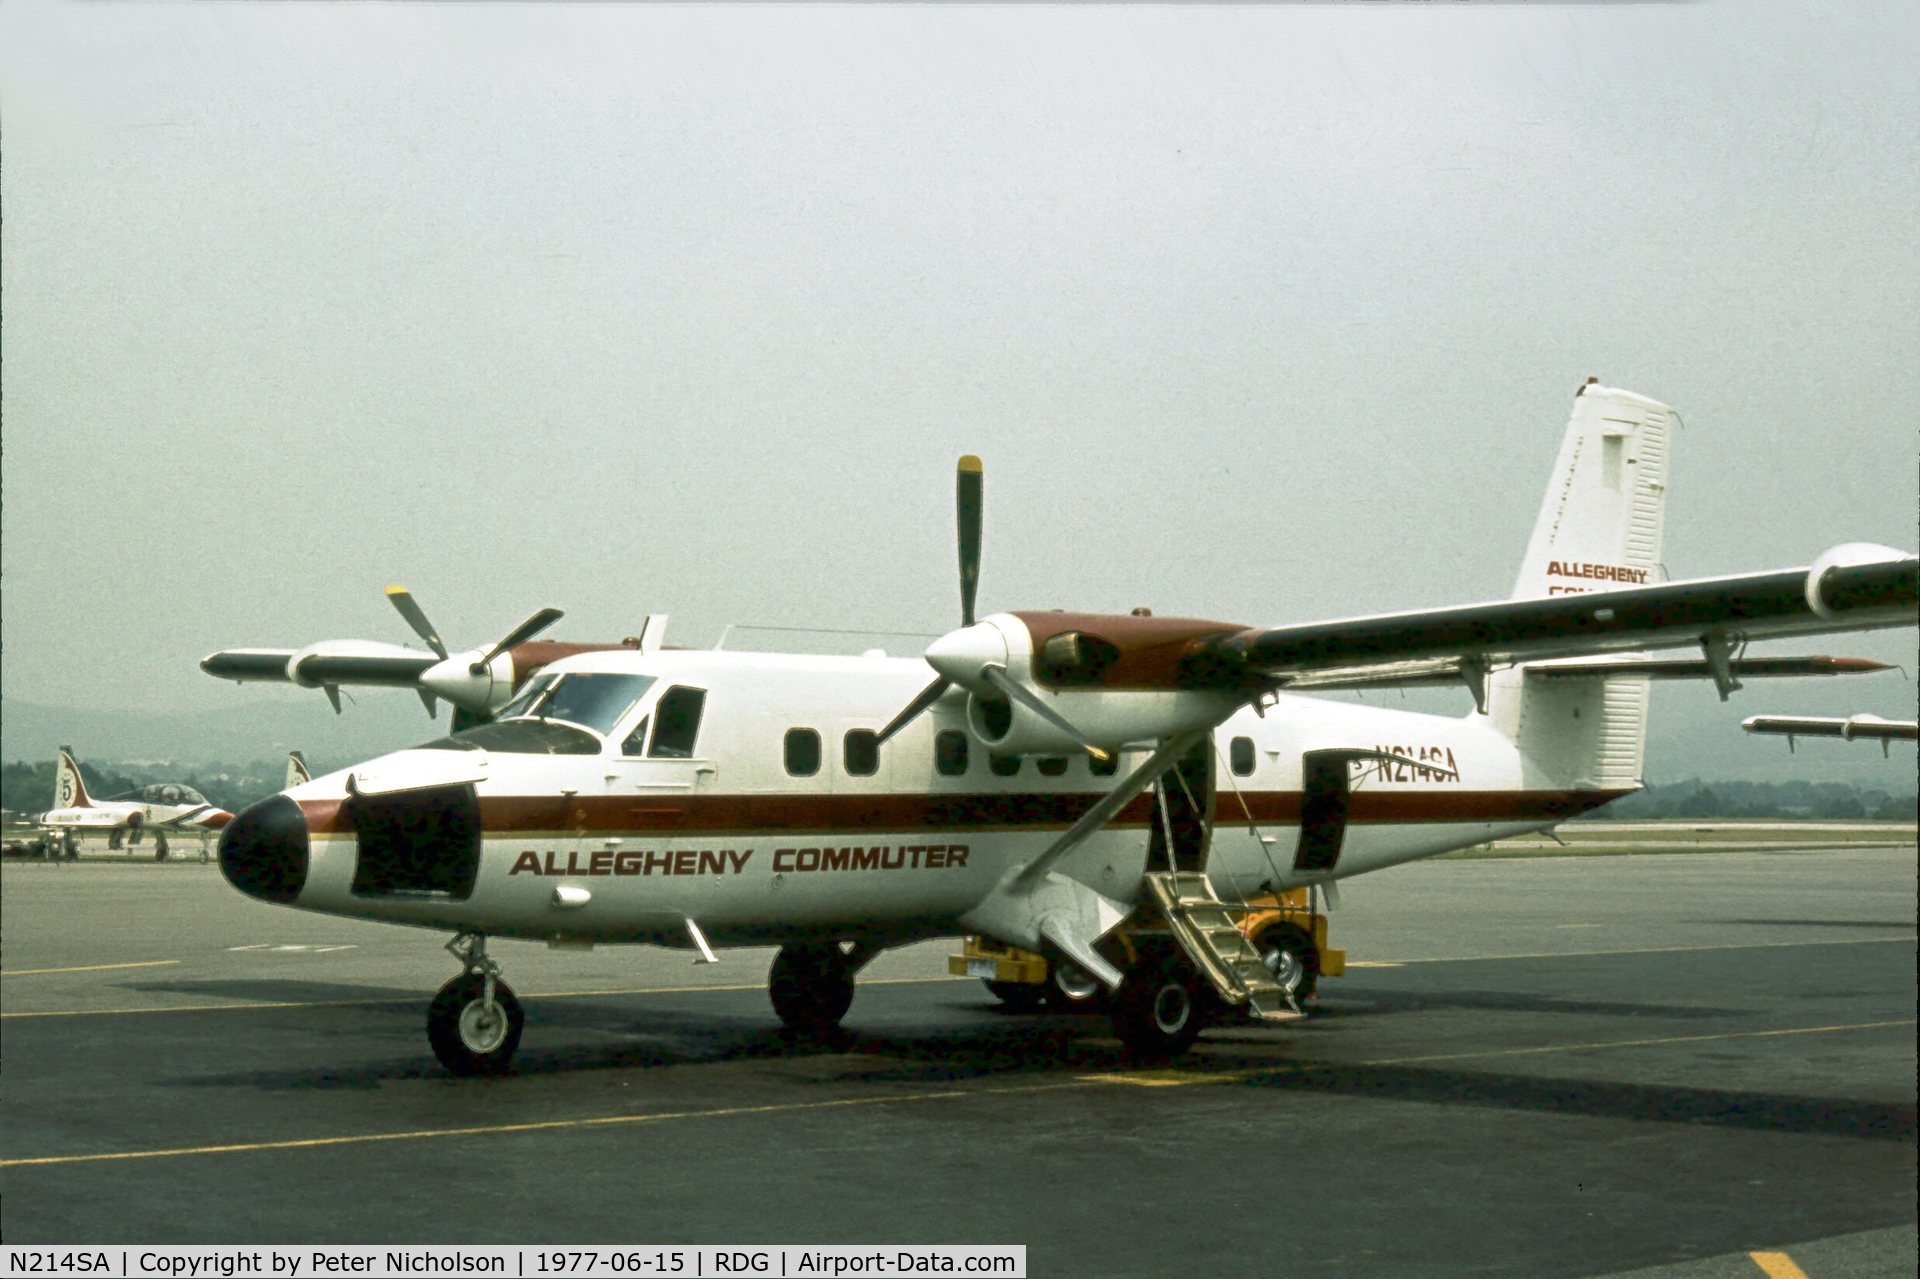 N214SA, 1975 De Havilland Canada DHC-6-300 Twin Otter C/N 468, Suburban Airlines operated this Twin Otter as an Allegheny Commuter service at the time of the 1977 Reading Airshow.